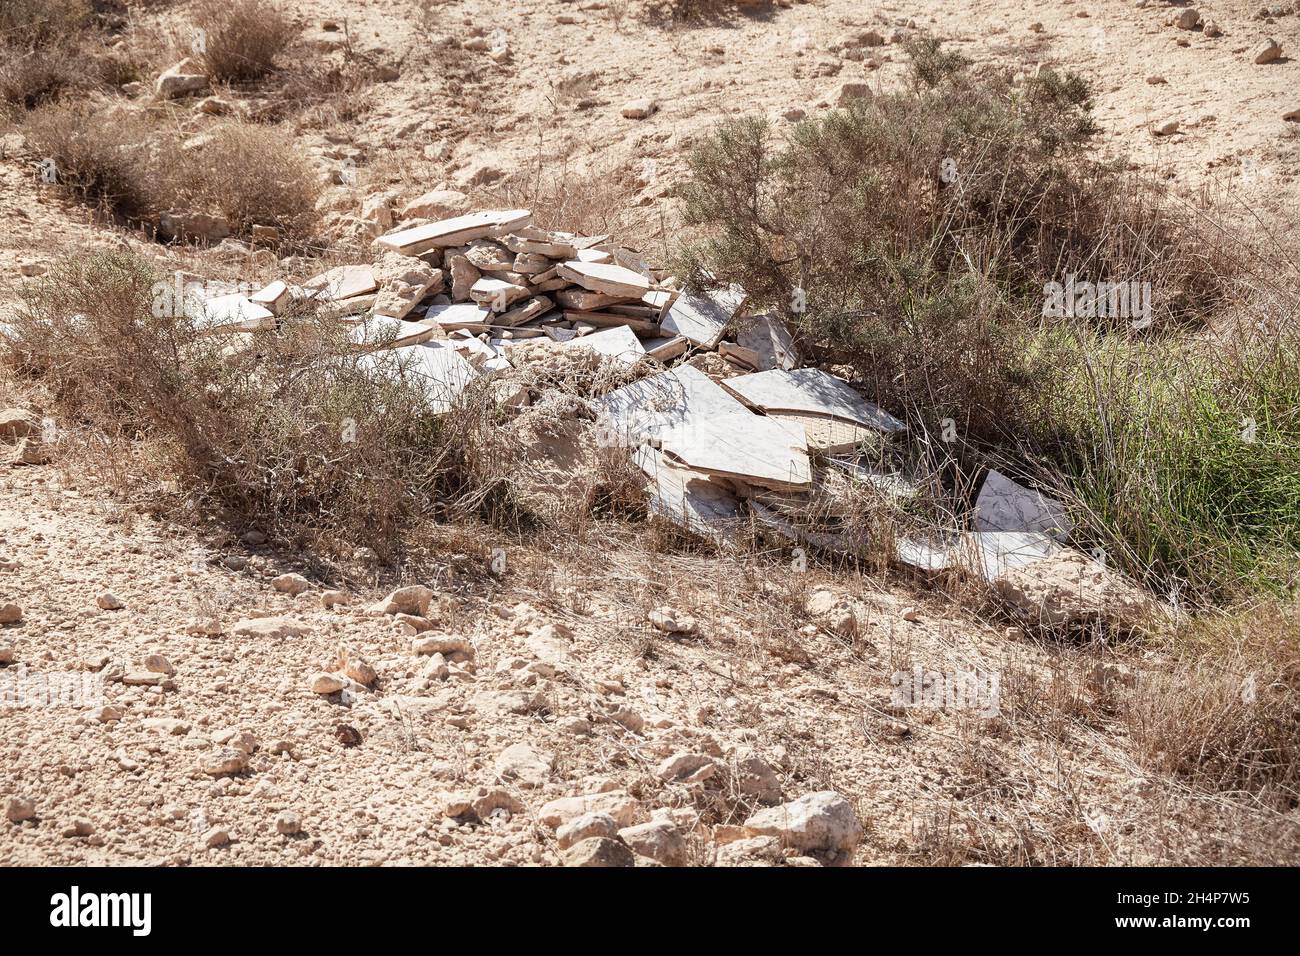 irresponsibly discarded building materials that were dumped illegally pollute a small protected stream bed in the Negev Highlands desert in Israel Stock Photo